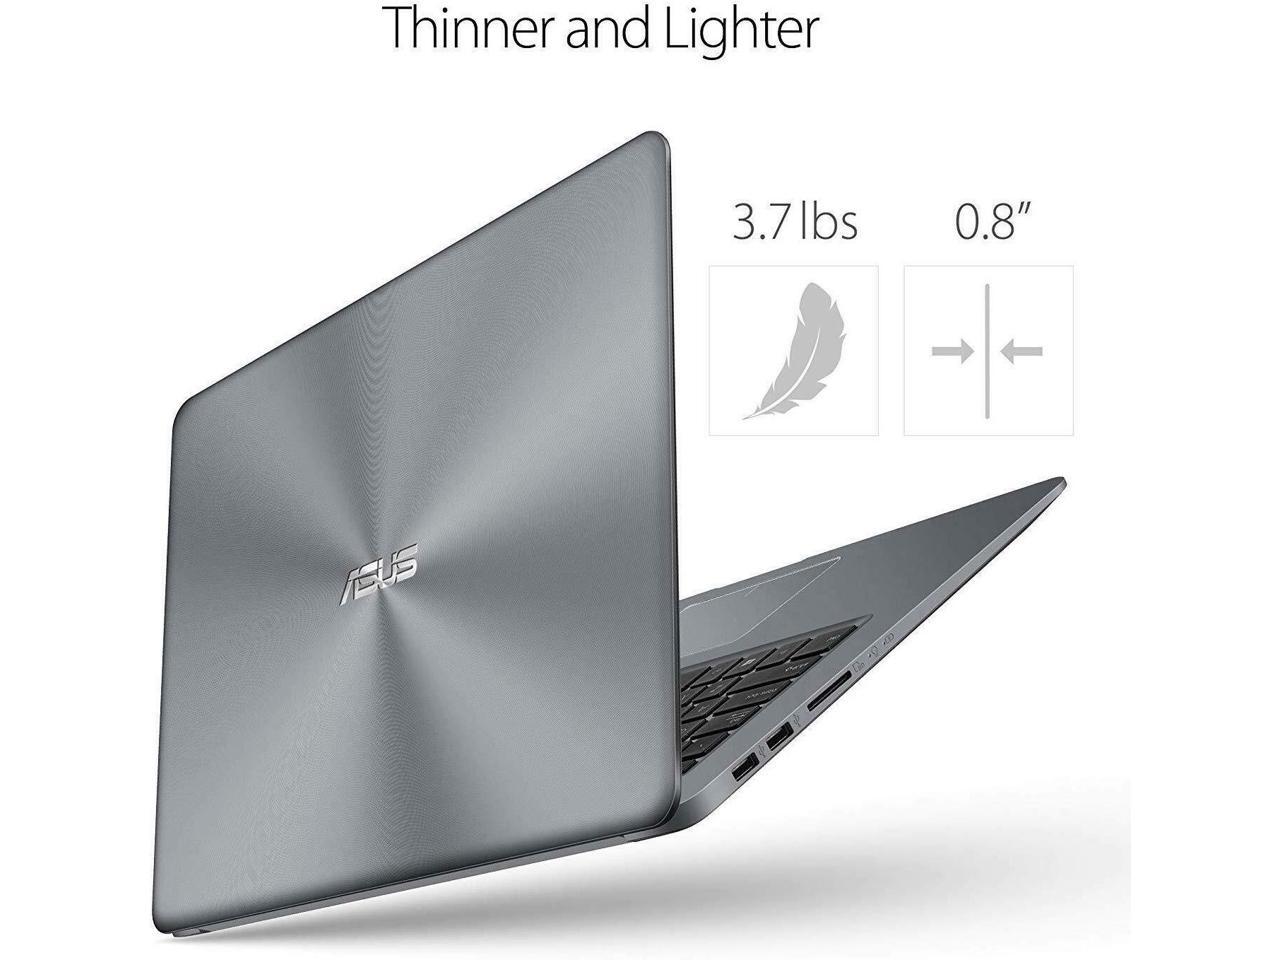 Newest Asus VivoBook Thin & Lightweight Laptop (12G DDR4/256G SSD)|15.6" Full HD(1920x1080) WideView display| AMD Quad Core A12-9720P Processor| Wi-Fi AC|Fingerprint Reader|HDMI |Windows 10 in S Mode